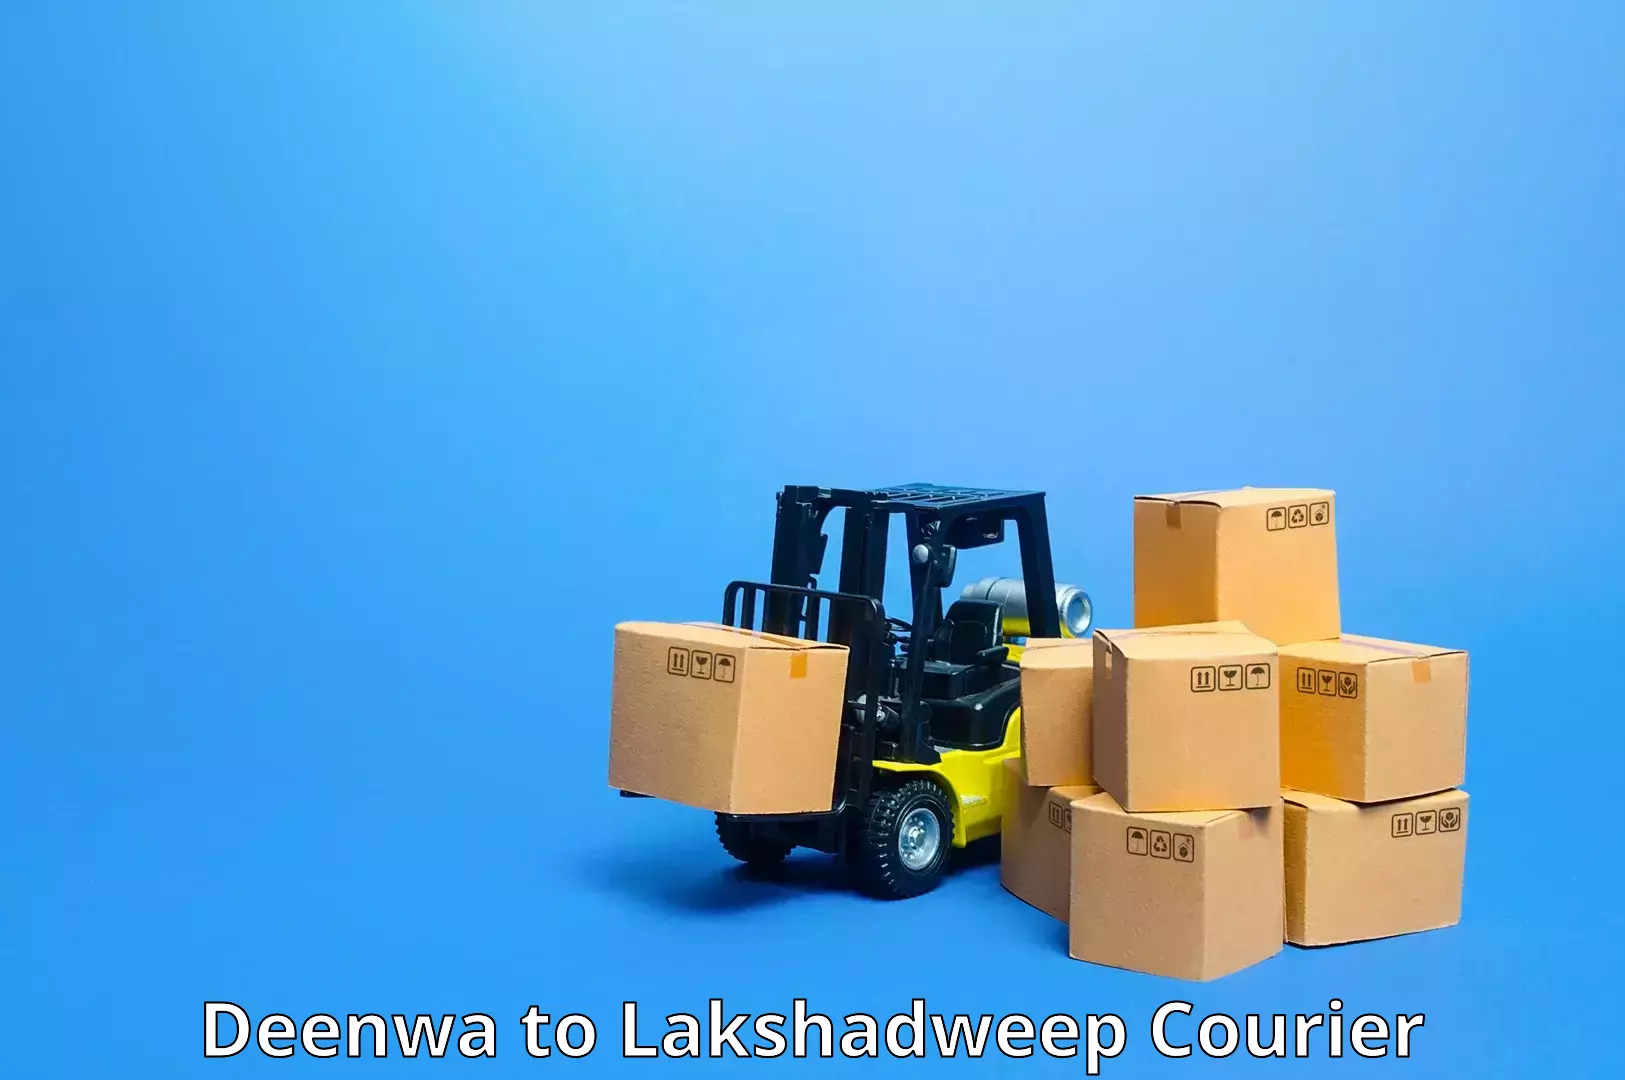 Express delivery network Deenwa to Lakshadweep